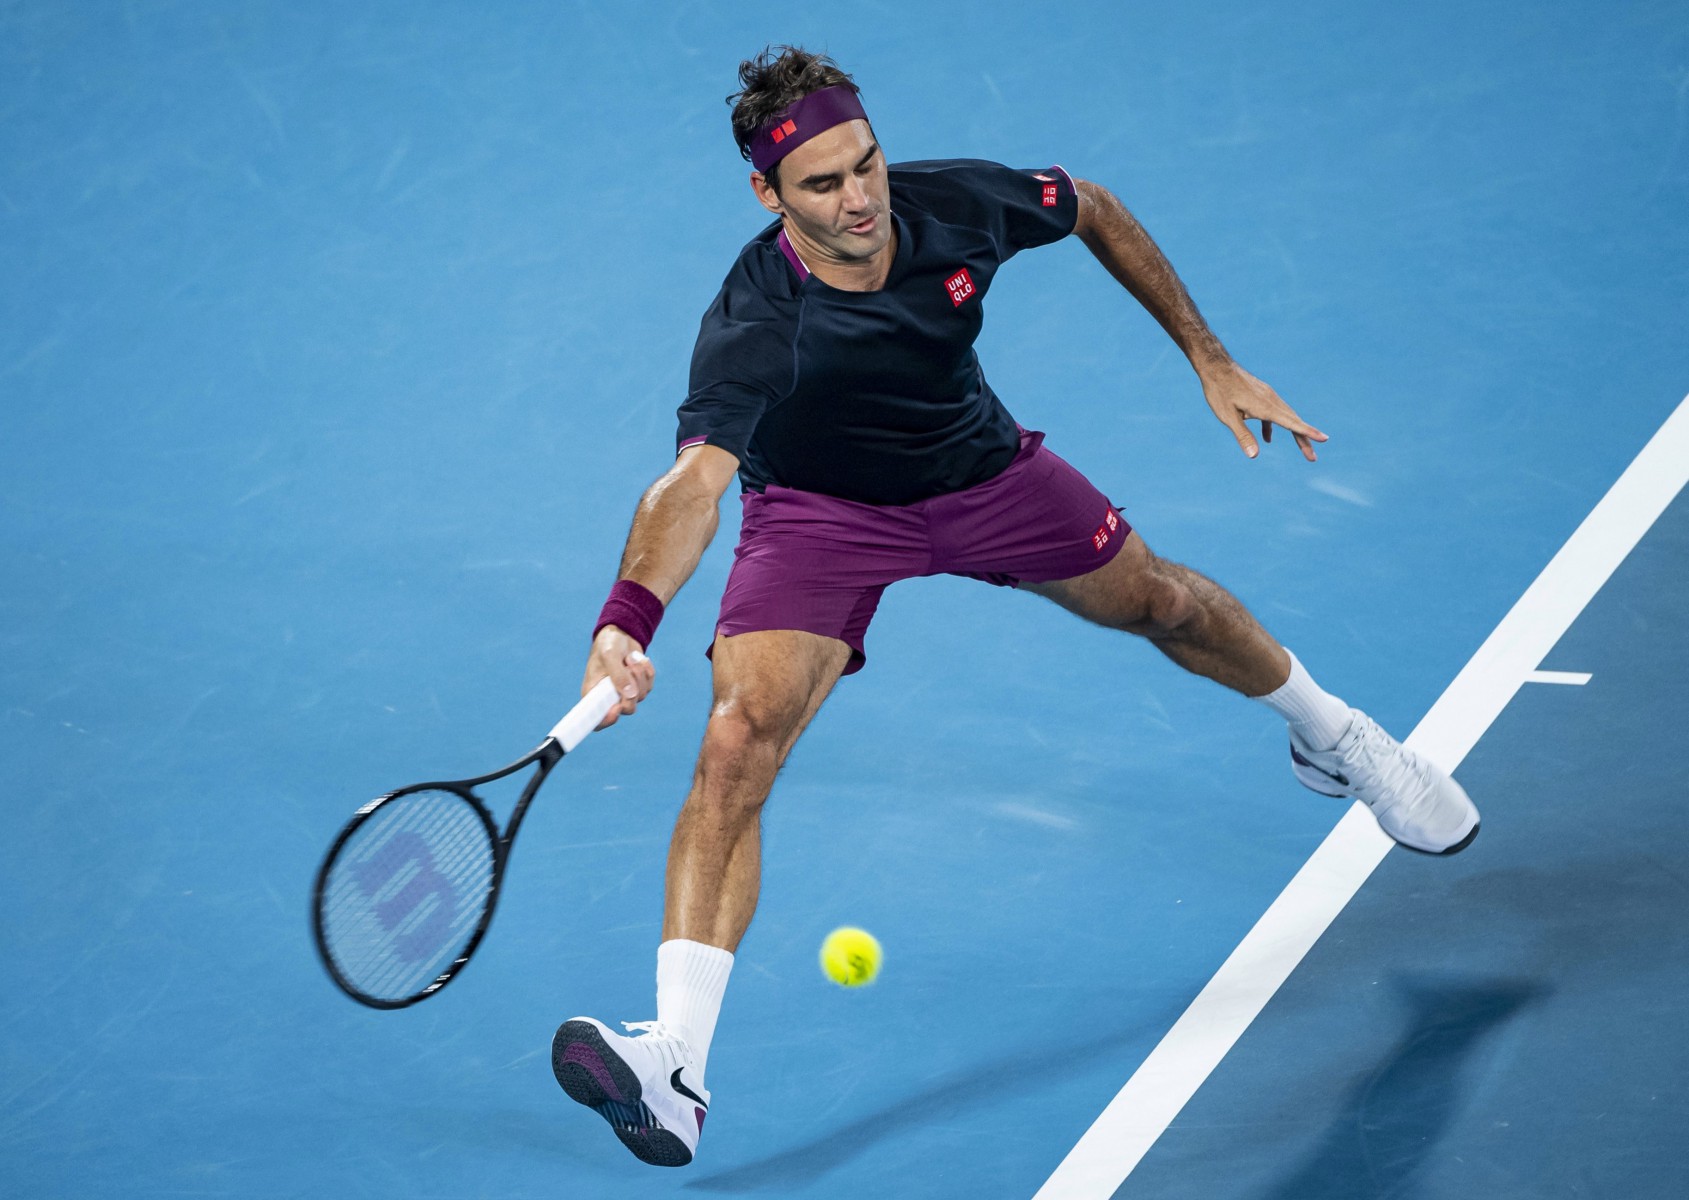 , Federer nearly quit a match for first time in 22-year career after suffering with groin injury in Djokovic loss